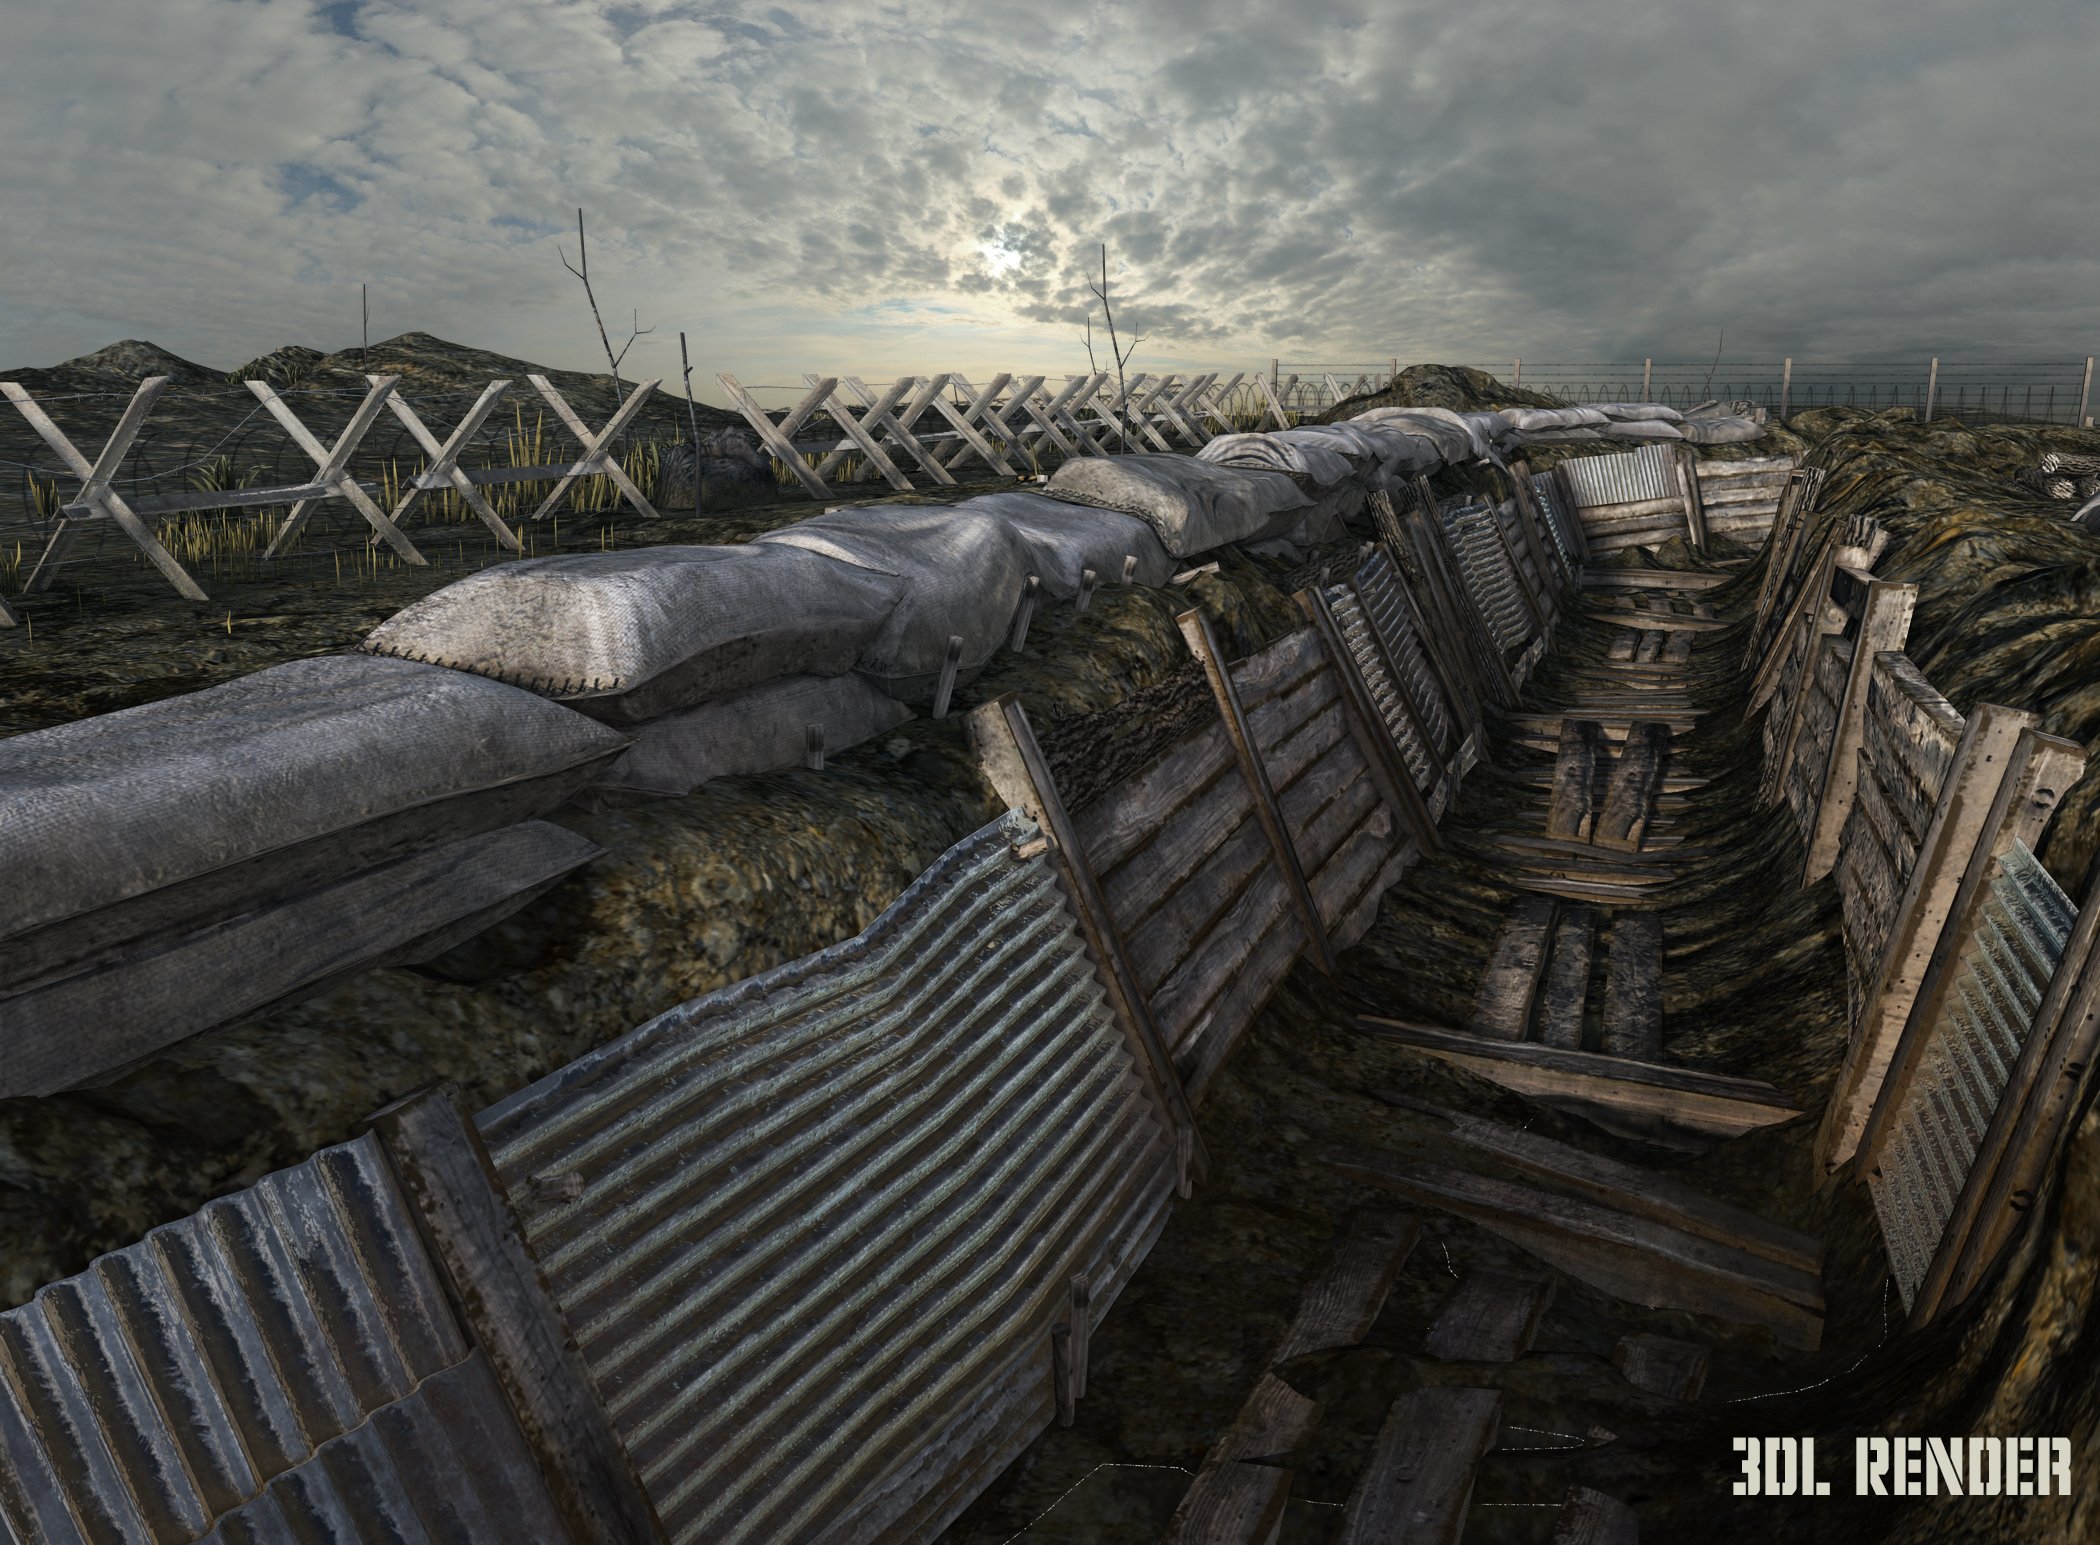 WW1 Trench, No Man's Land by: The AntFarm, 3D Models by Daz 3D